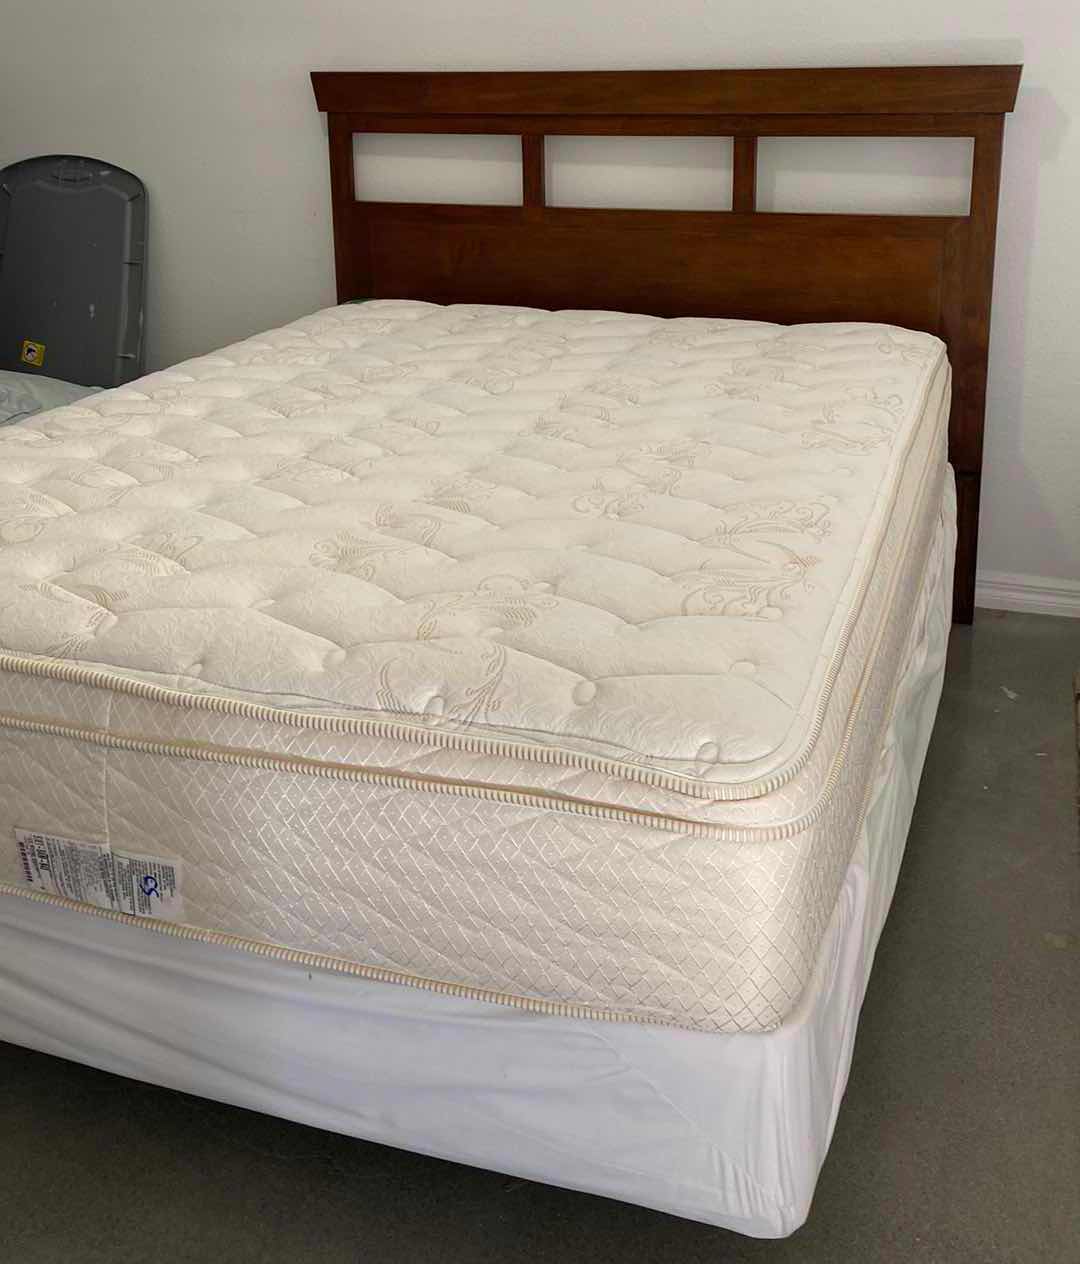 Photo 1 of QUEEN SIZE SERTA PERFECT SLEEPER MATTRESS AND BOX SPRING USED IN GUEST ROOM 68” x 85” H 50”